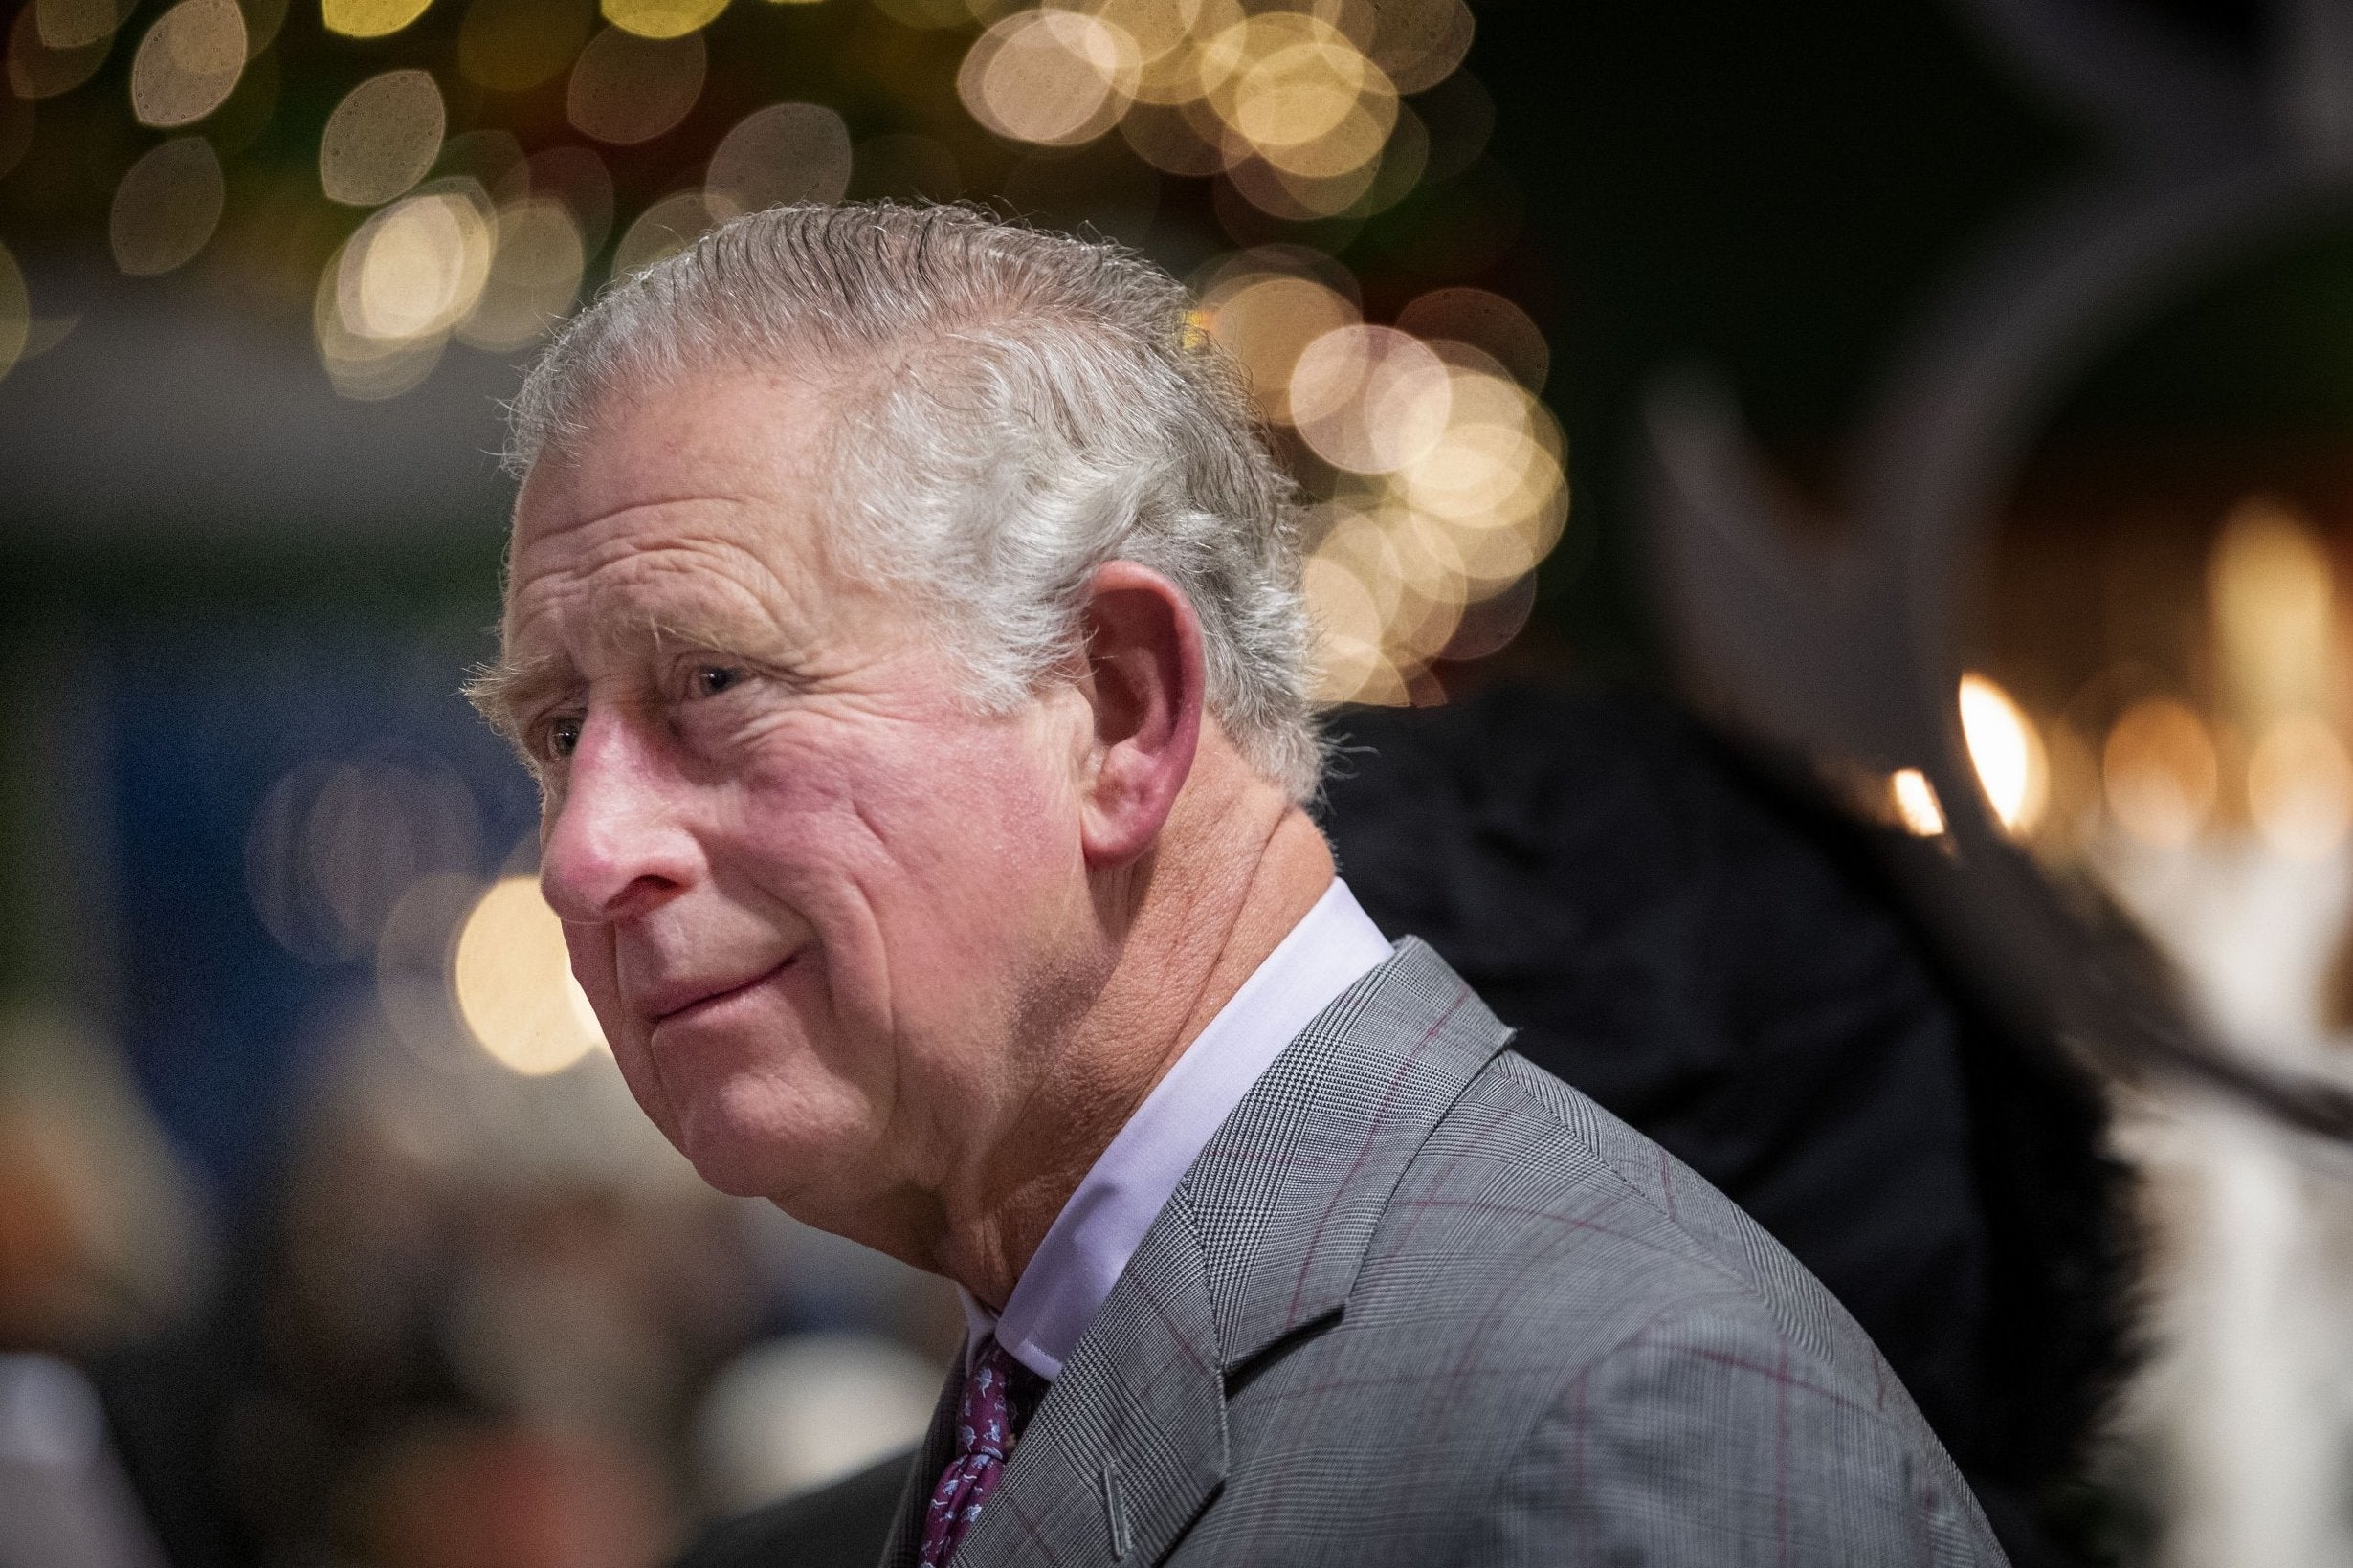 Prince Charles, Duke of Rothesay makes a surprise visit to the Christmas tea dance at Dumfries House on 20 December, 2018 in Cumnock, Scotland